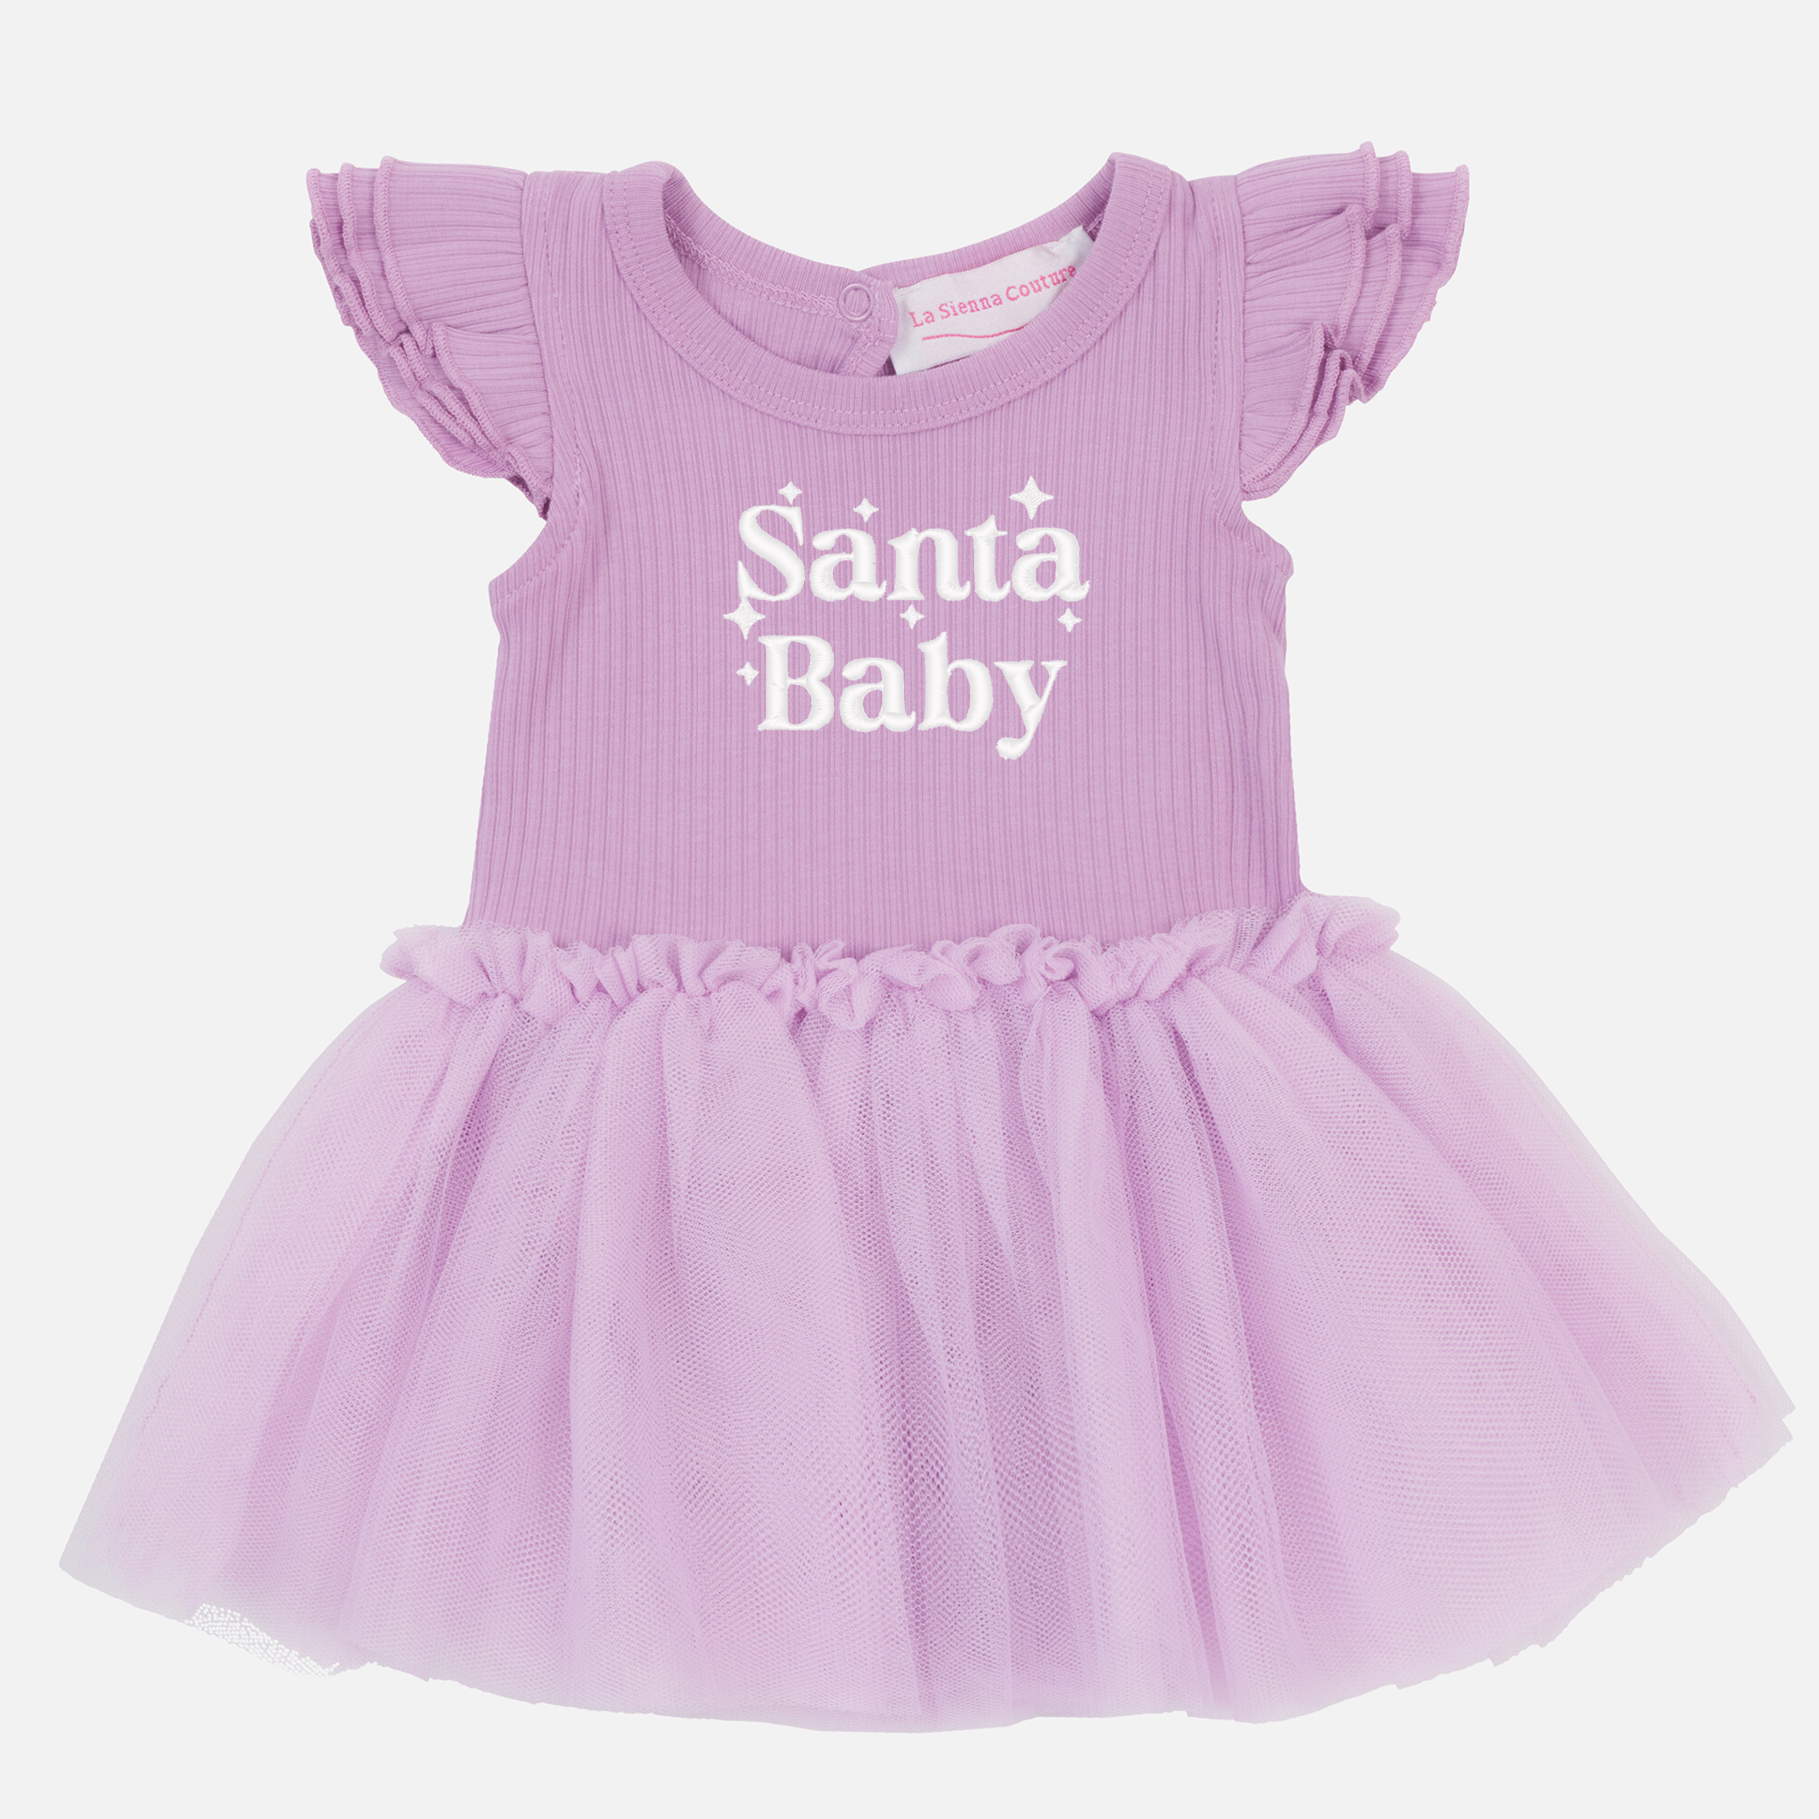 Embroidered Cozy Summer Tutu Dress - Lavender Frost